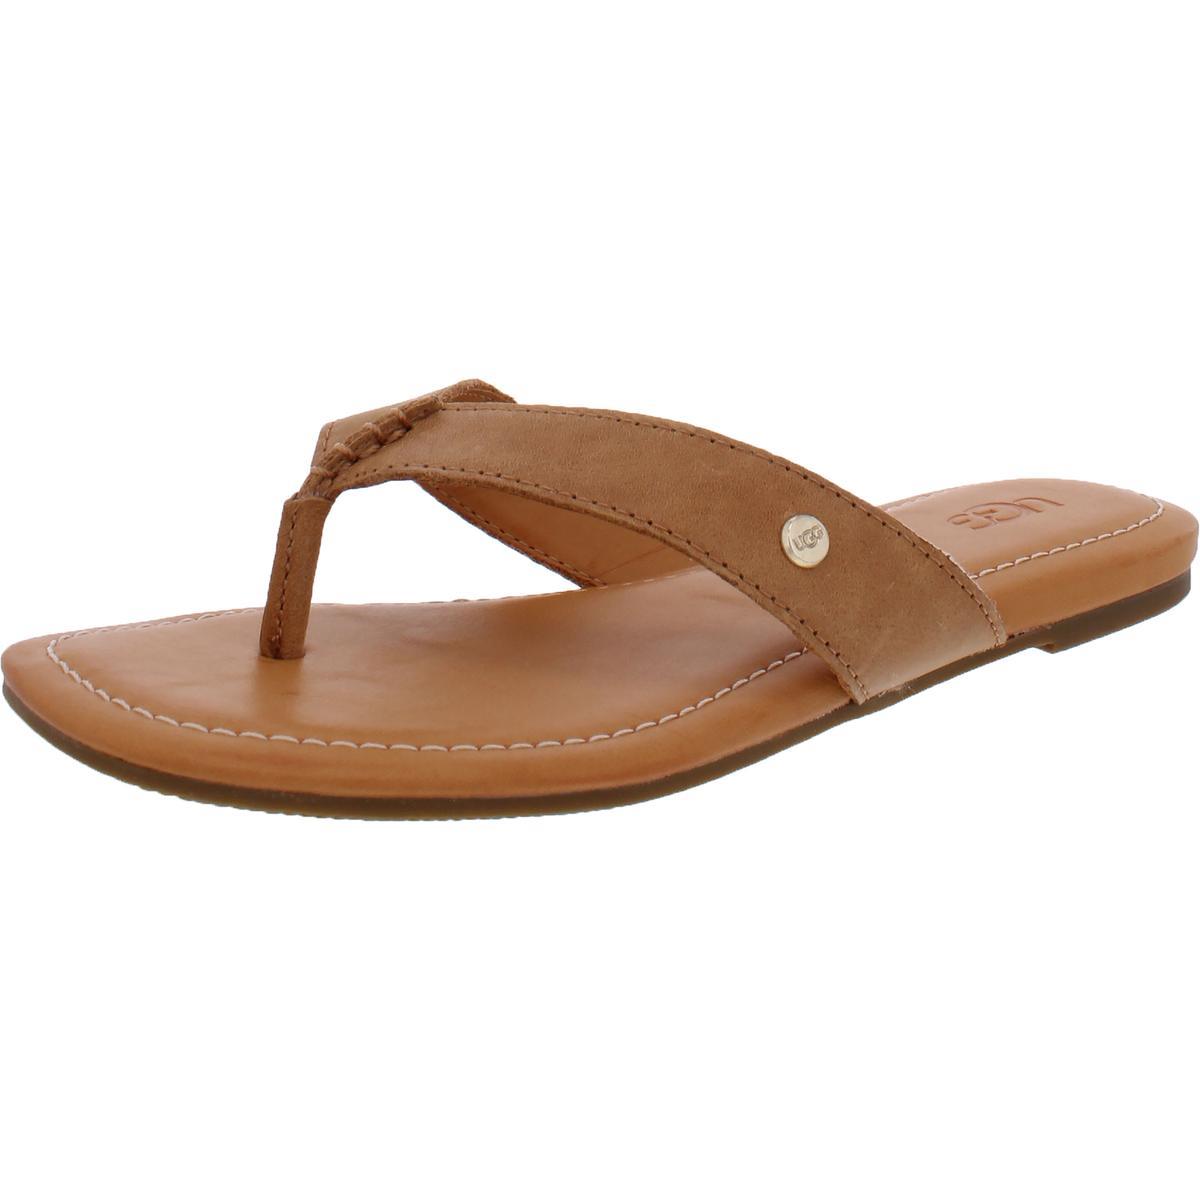 Ugg Womens Tuolumne Leather Thong Slides Flat Sandals Shoes Bhfo 9982 Almond